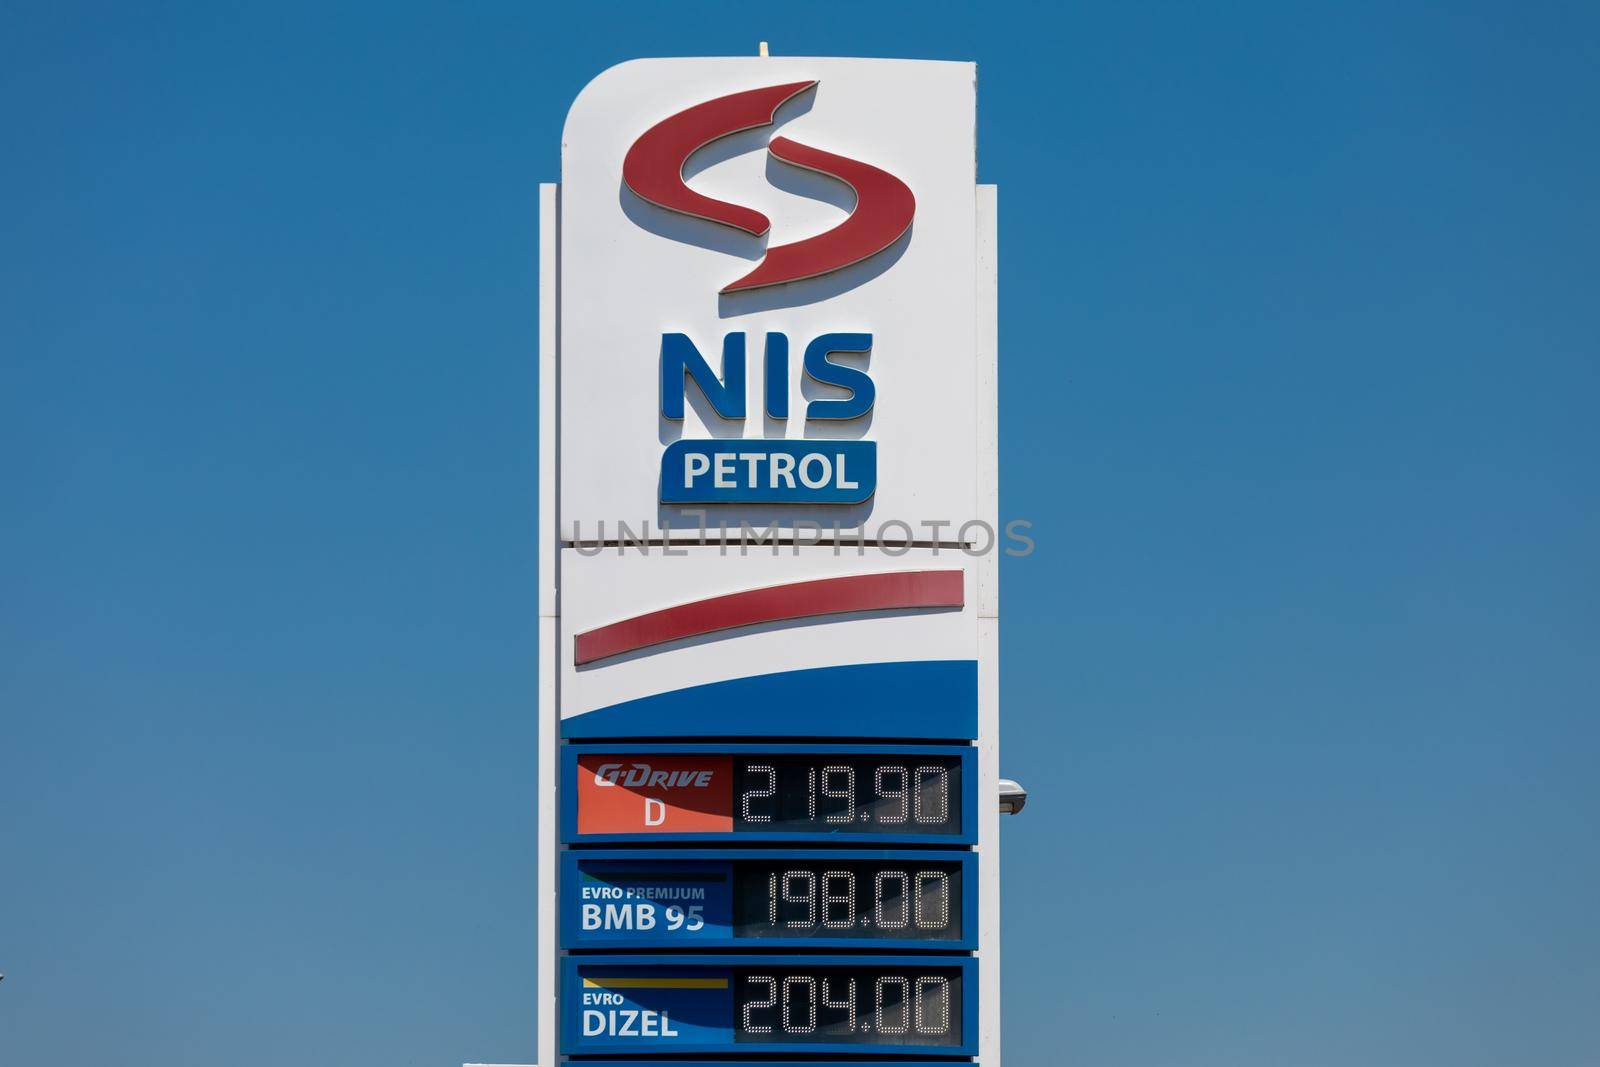 Logo and sign of NIS Petrol on gas station. NIS Petrol (Oil Industry of Serbia) is an largest oil refining company in Serbia by adamr